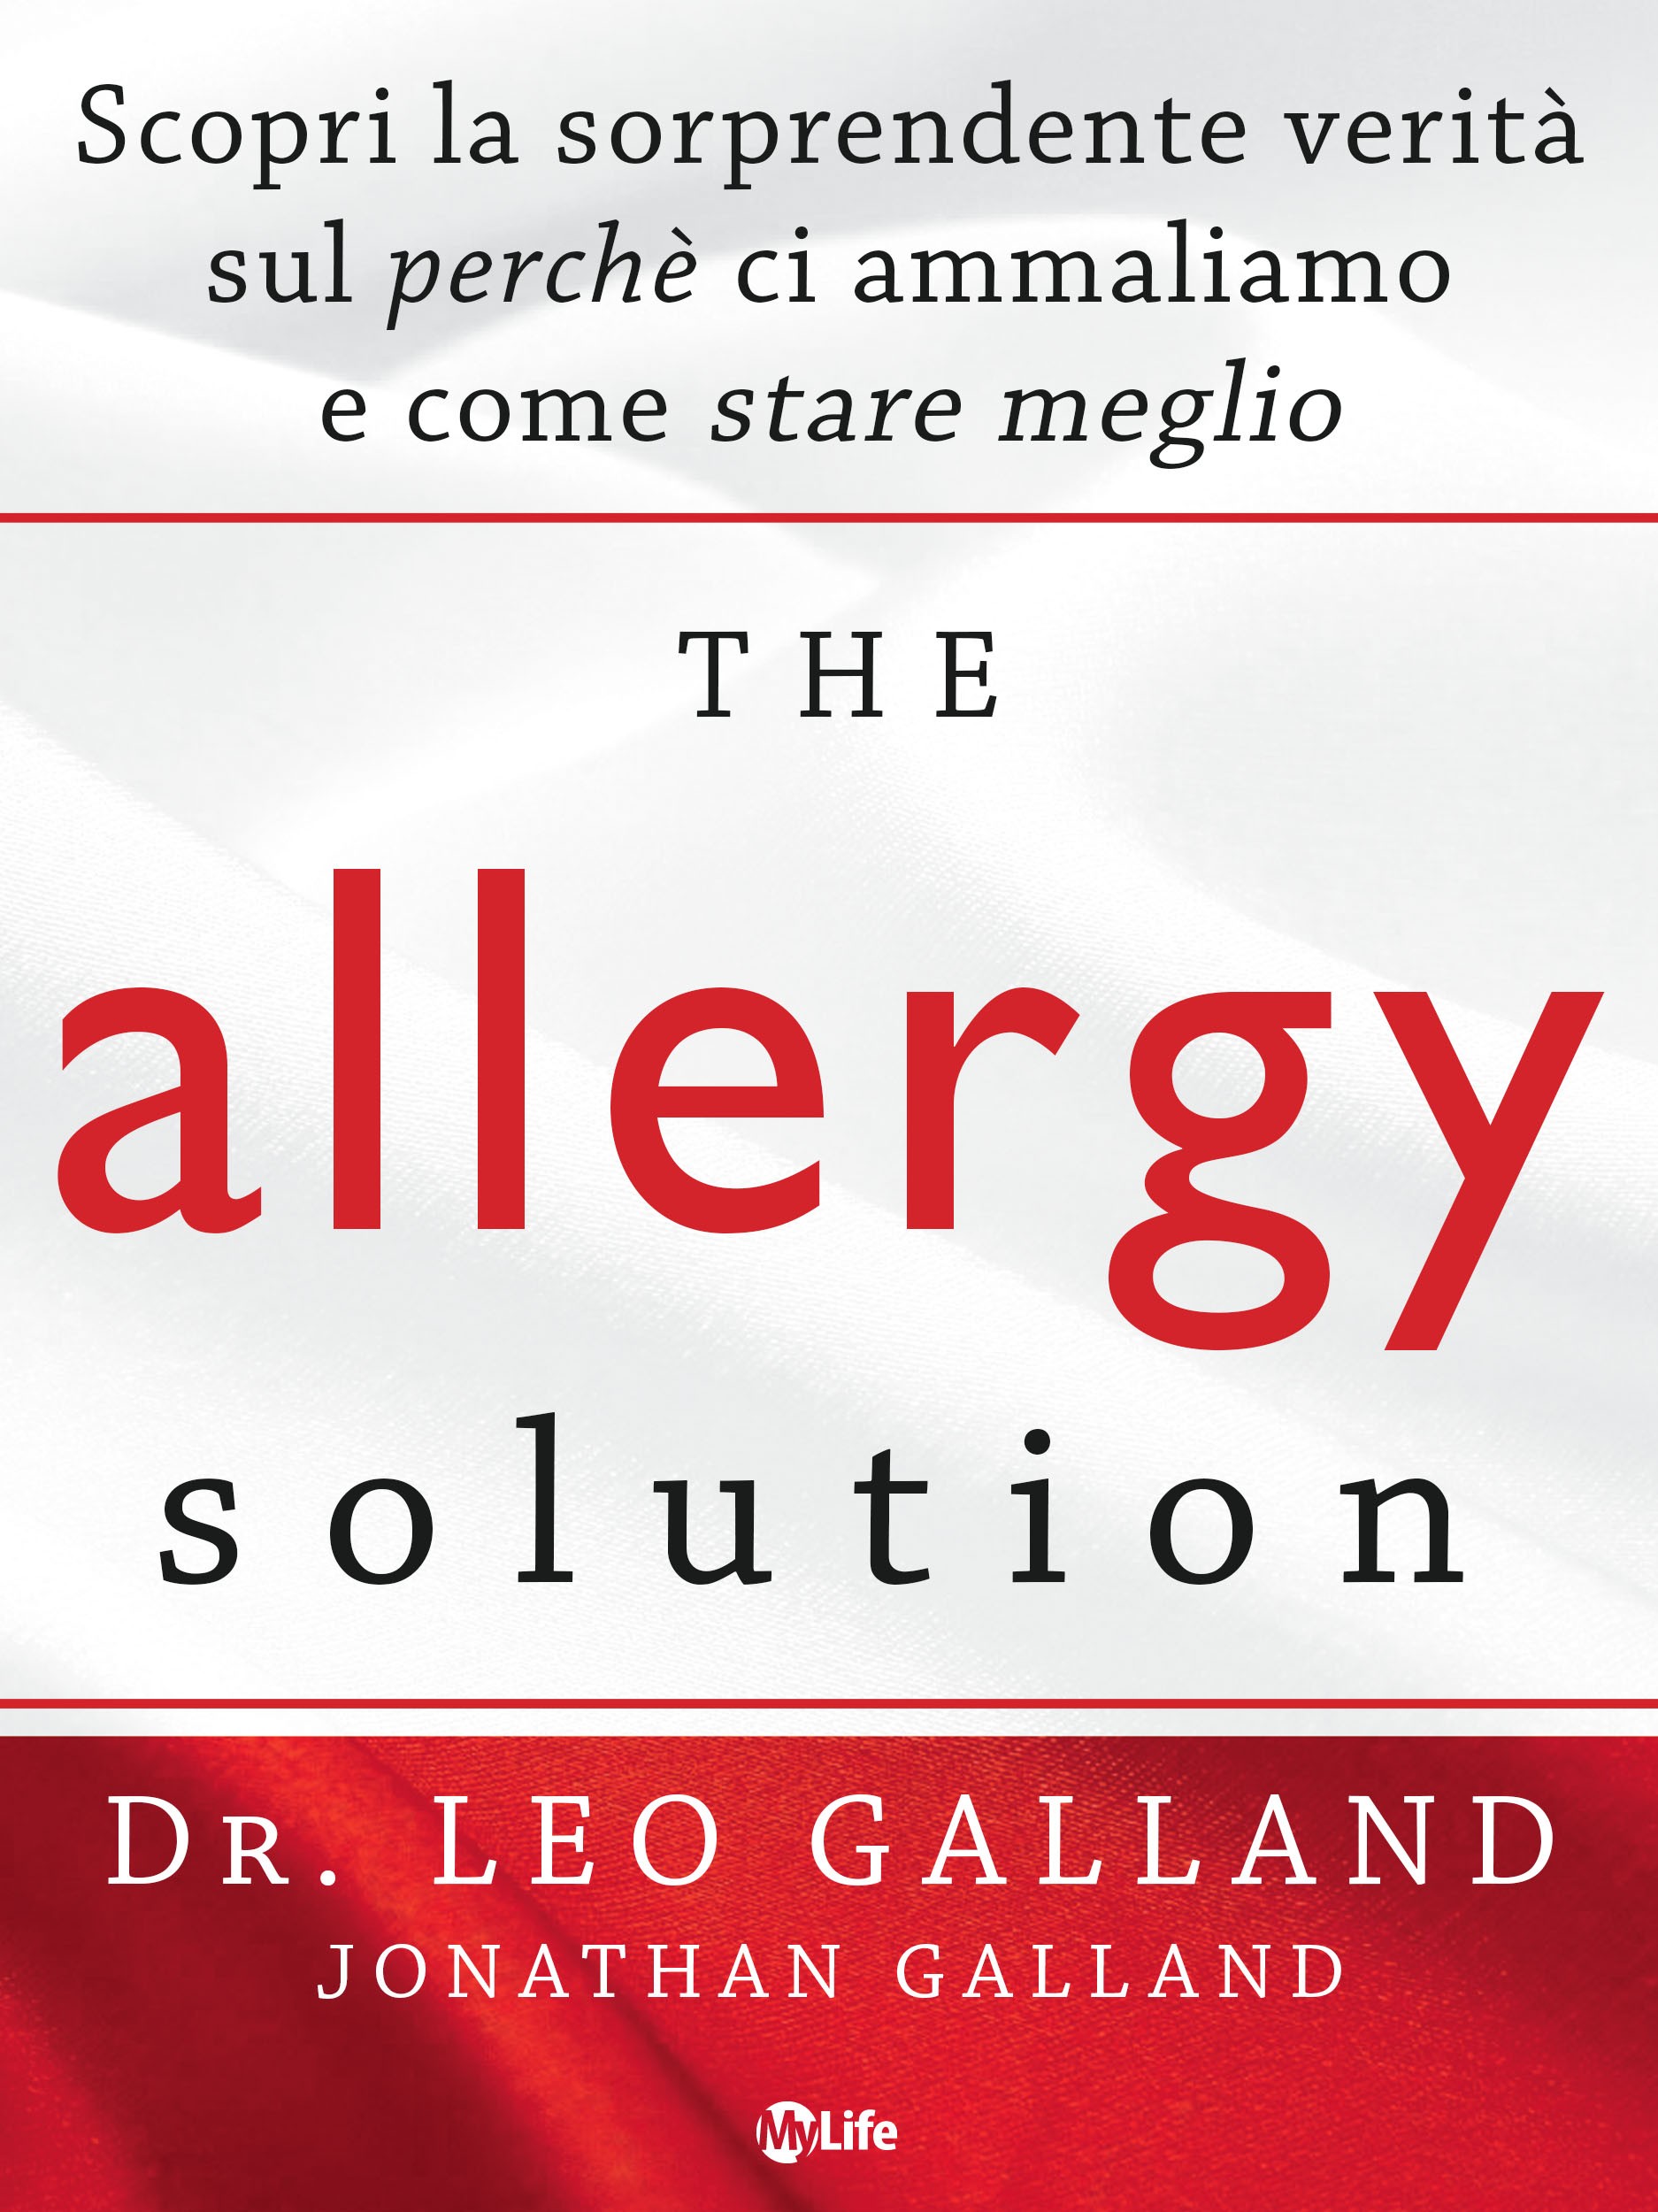 The Allergy Solution - Librerie.coop